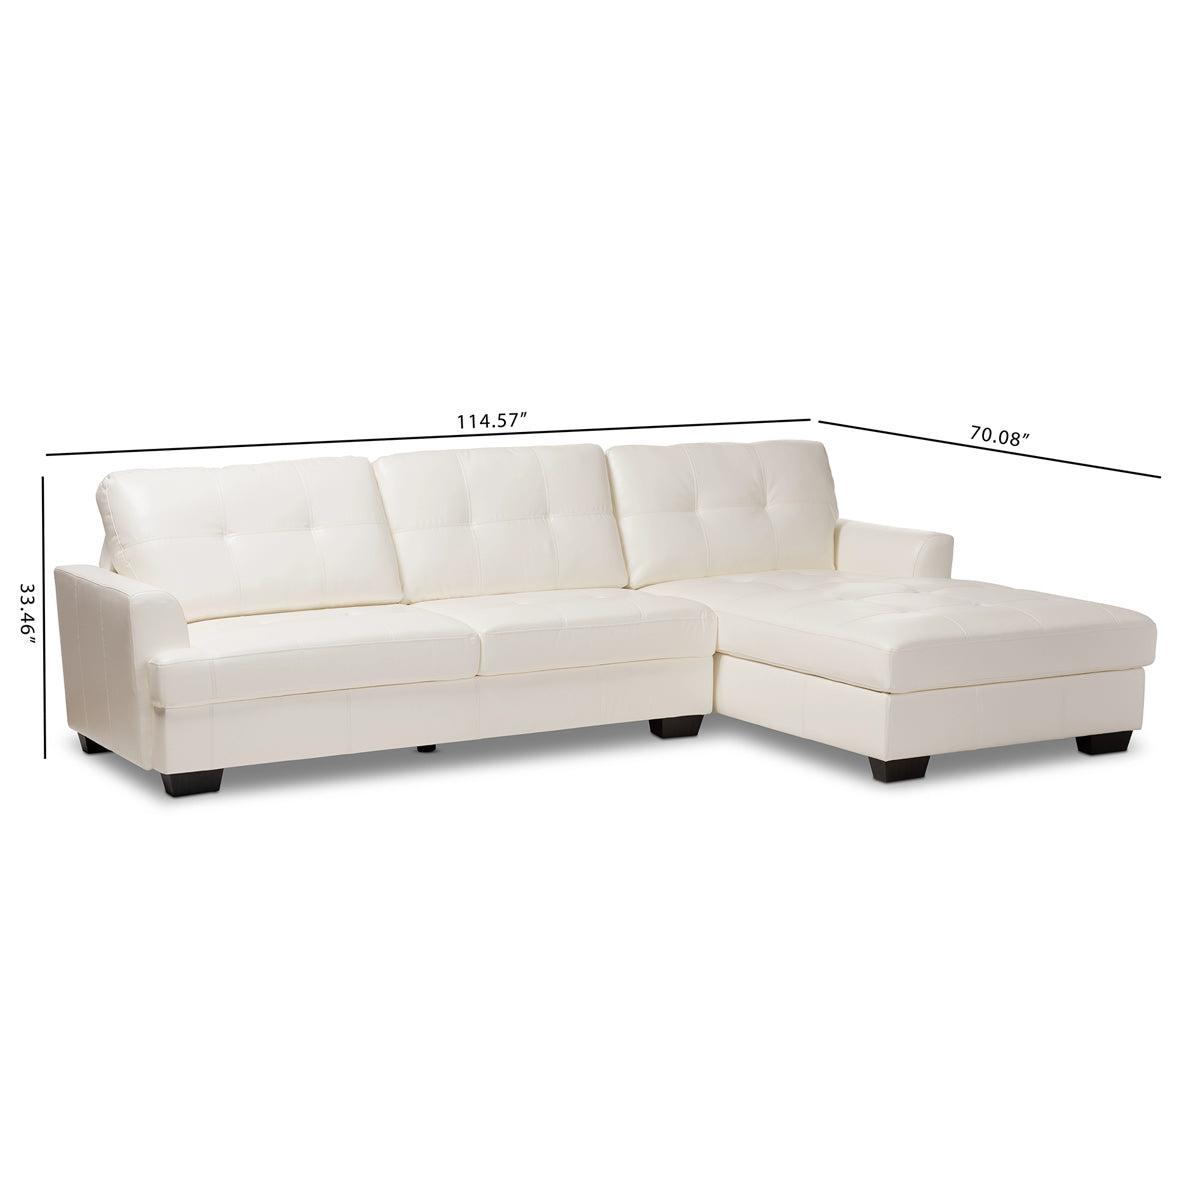 Baxton Studio Adalynn Modern and Contemporary White Faux Leather Upholstered Sectional Sofa Baxton Studio-sofas-Minimal And Modern - 6